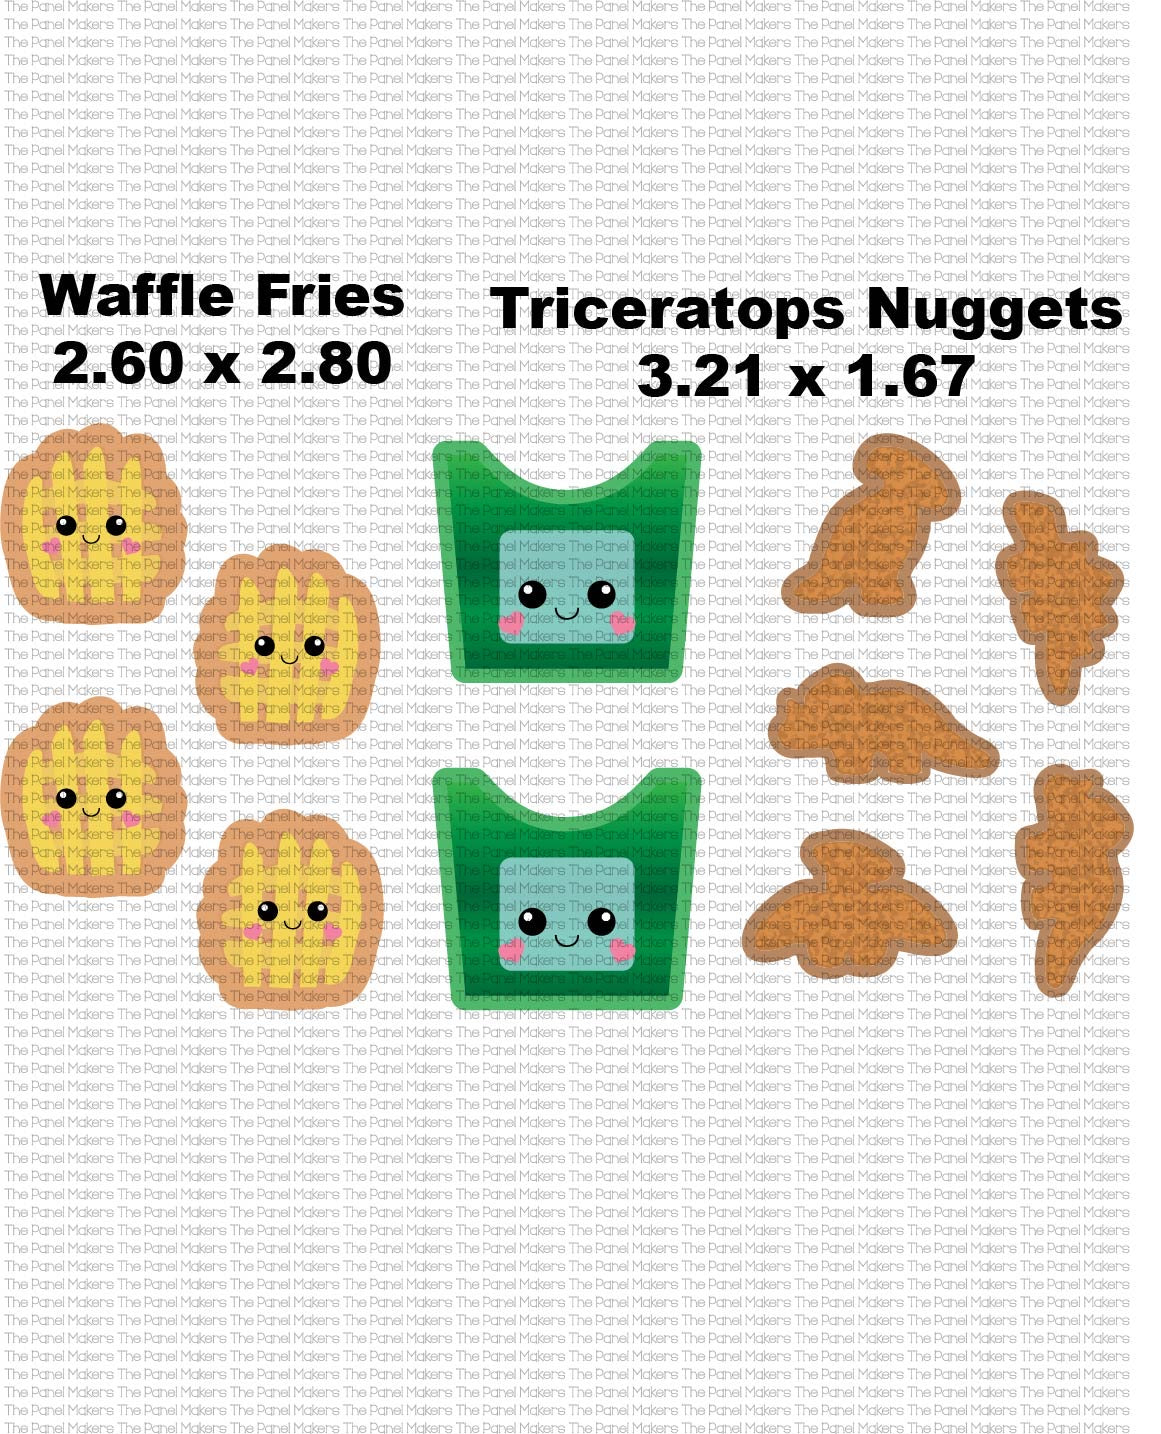 Dino Nuggets and Waffle Fries panel